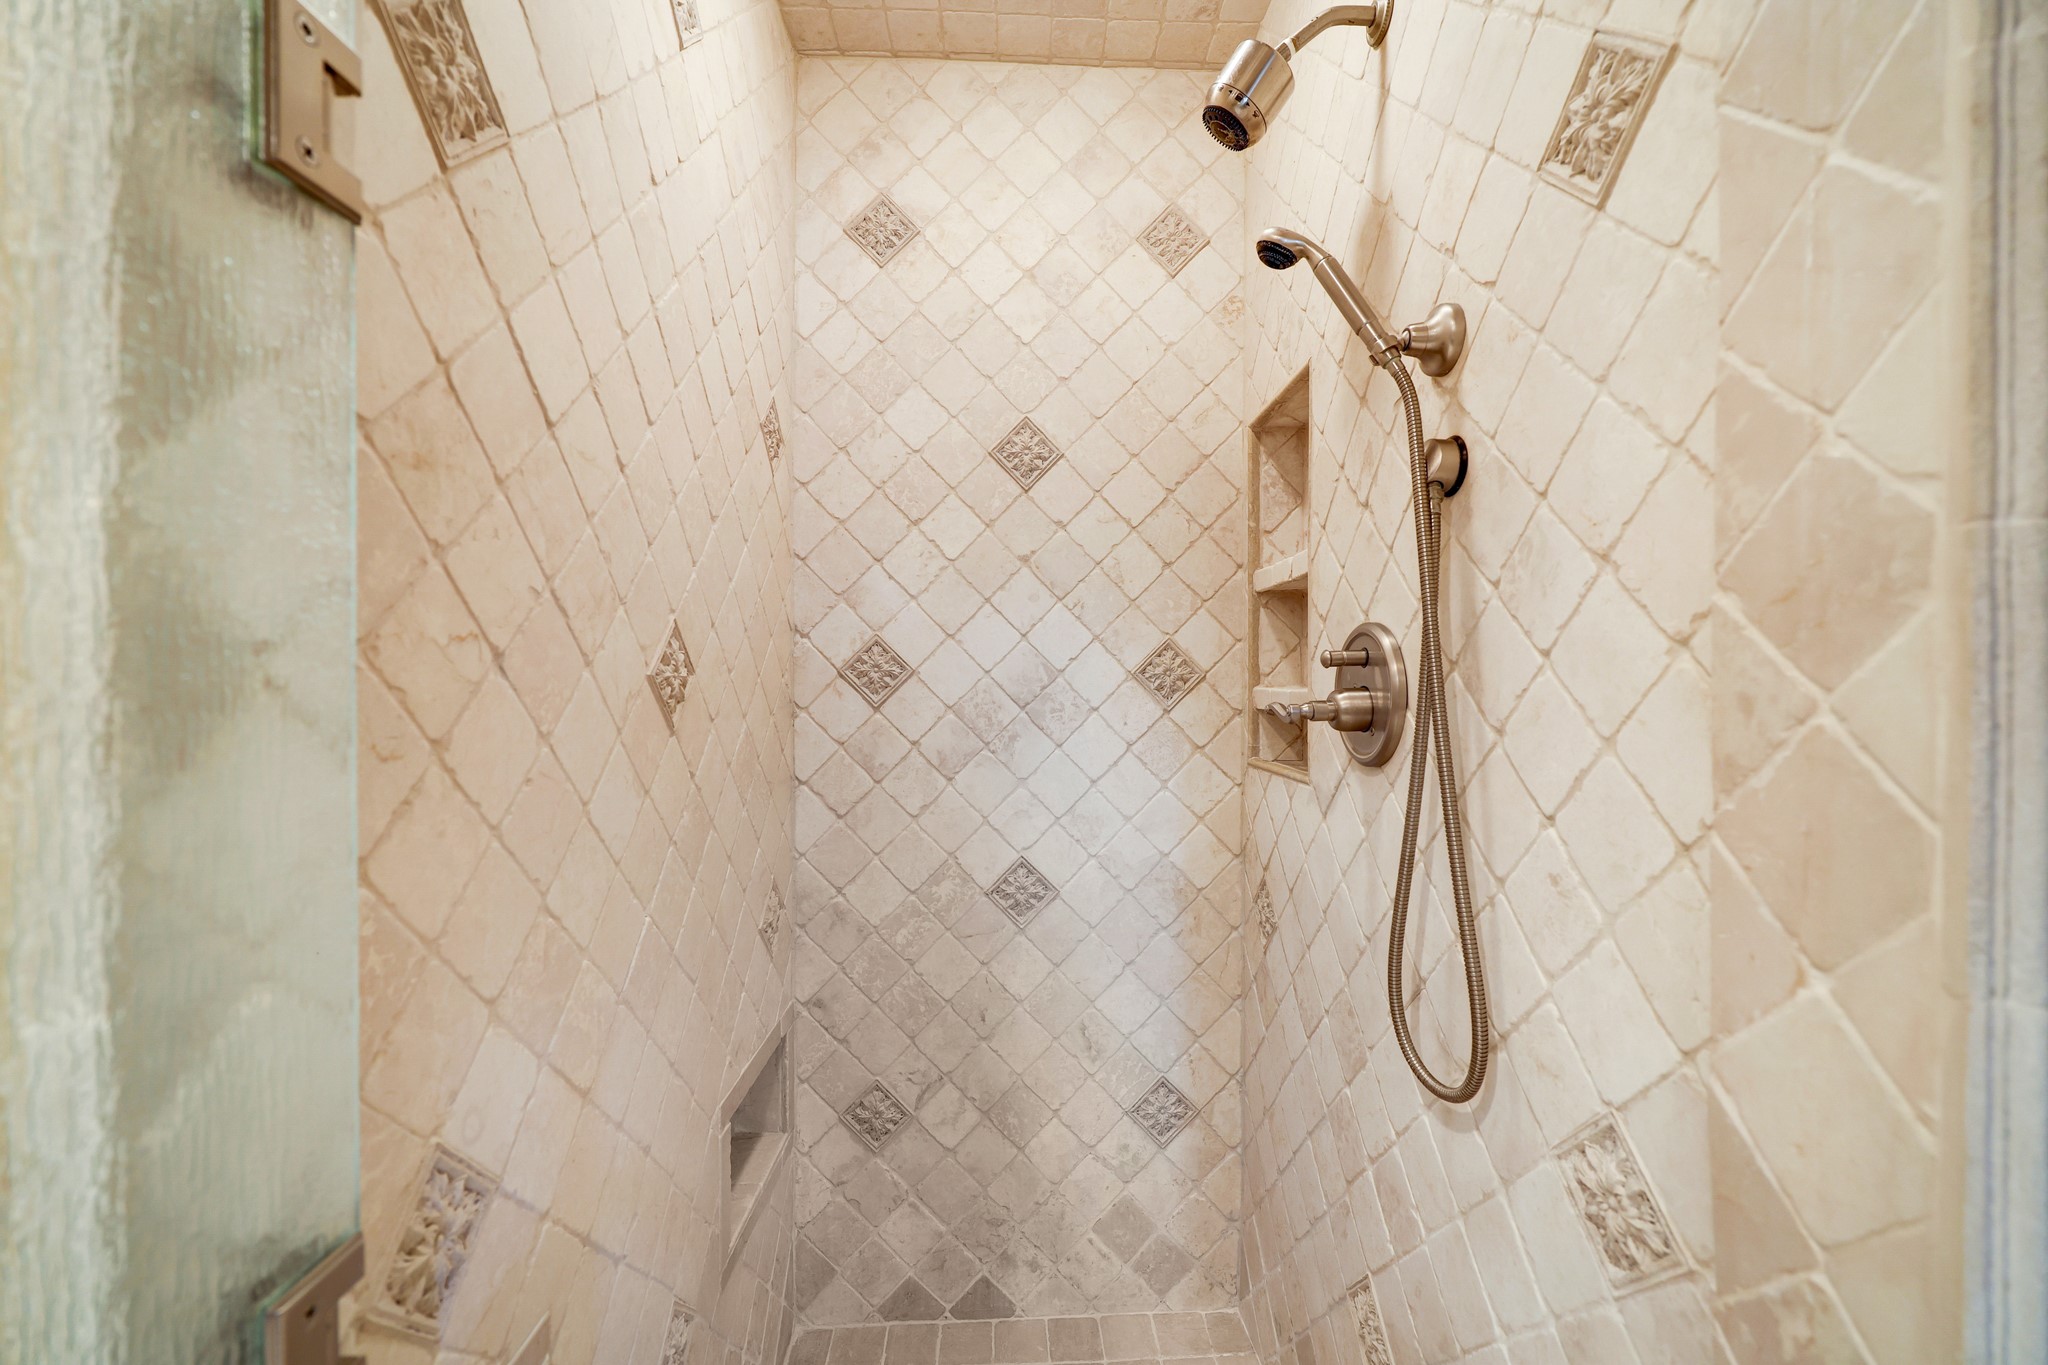 The shower is designed with a diamond-patterned Italian tile, accented with elegant decorative insets, offering a timeless look that complements the serene palette of the room. Modern fixtures, including a versatile handheld showerhead, ensure a spa-like experience in the comfort of your own home.